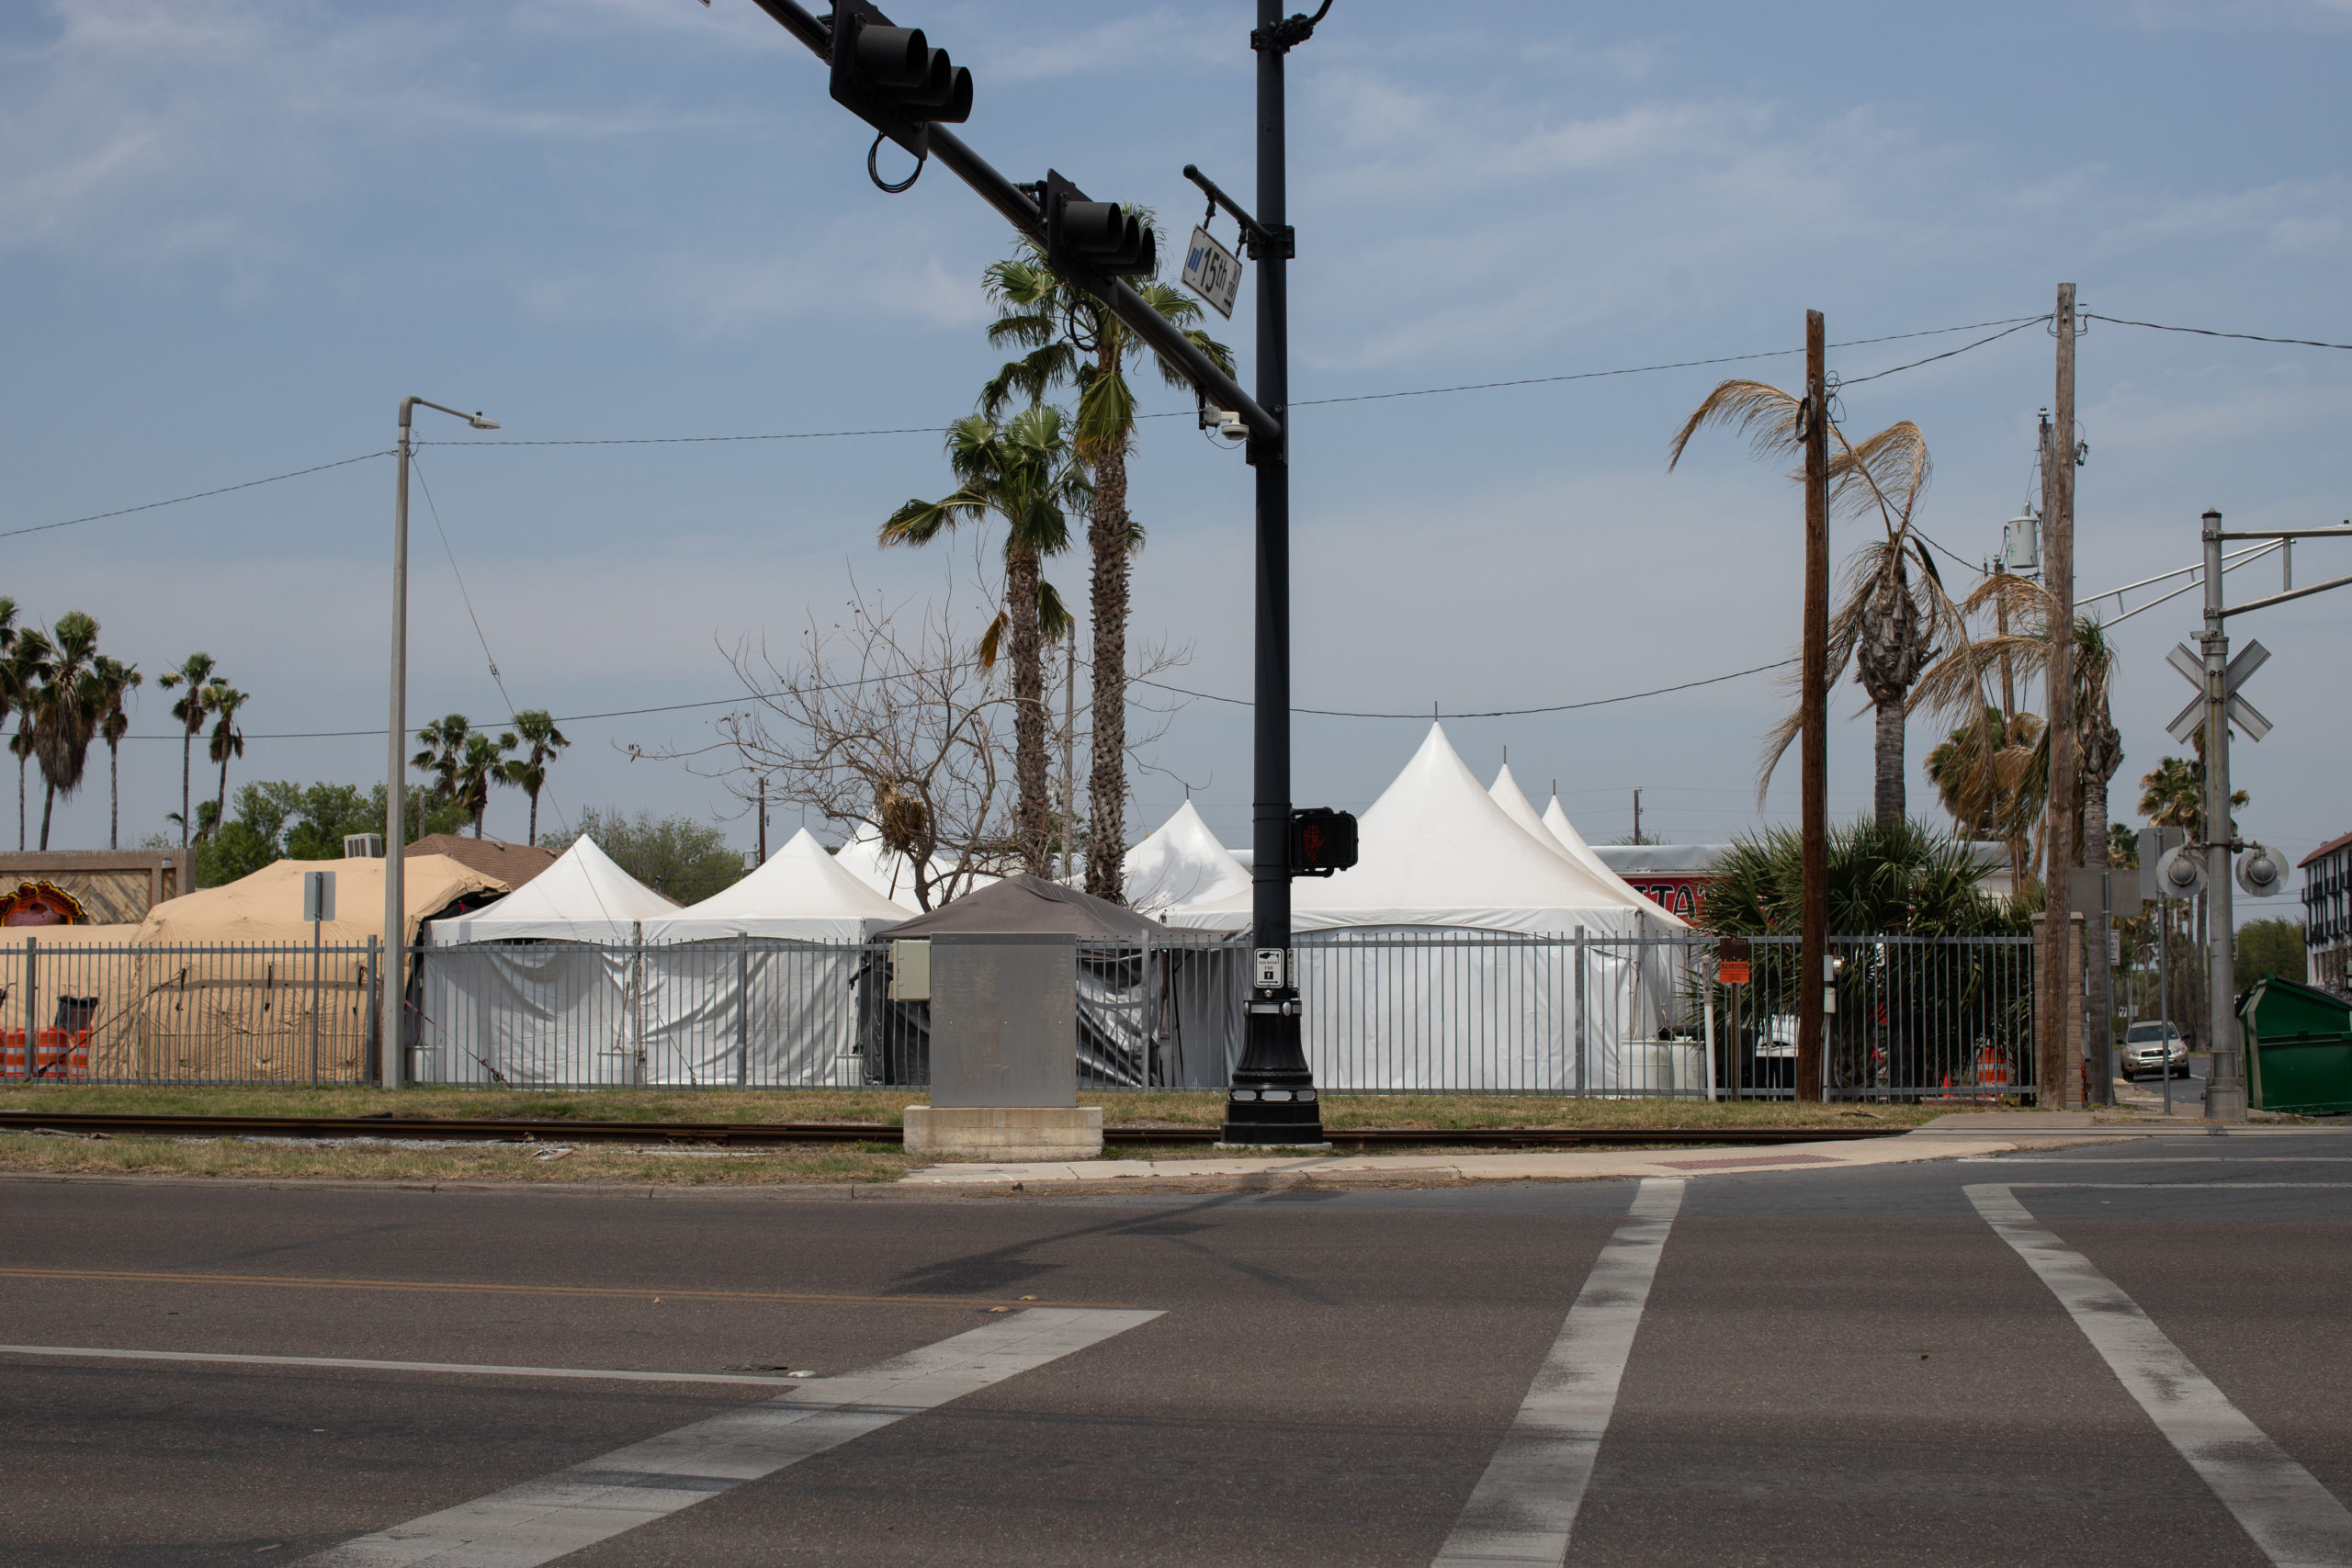 A temporary COVID-19 testing facility composed of several tents guarded by a private security official and a Customs and Border Protection officer was set up across the street from the bus station in McAllen, Texas on March 27, 2021. (Kaylee Greenlee - Daily Caller News Foundation) 